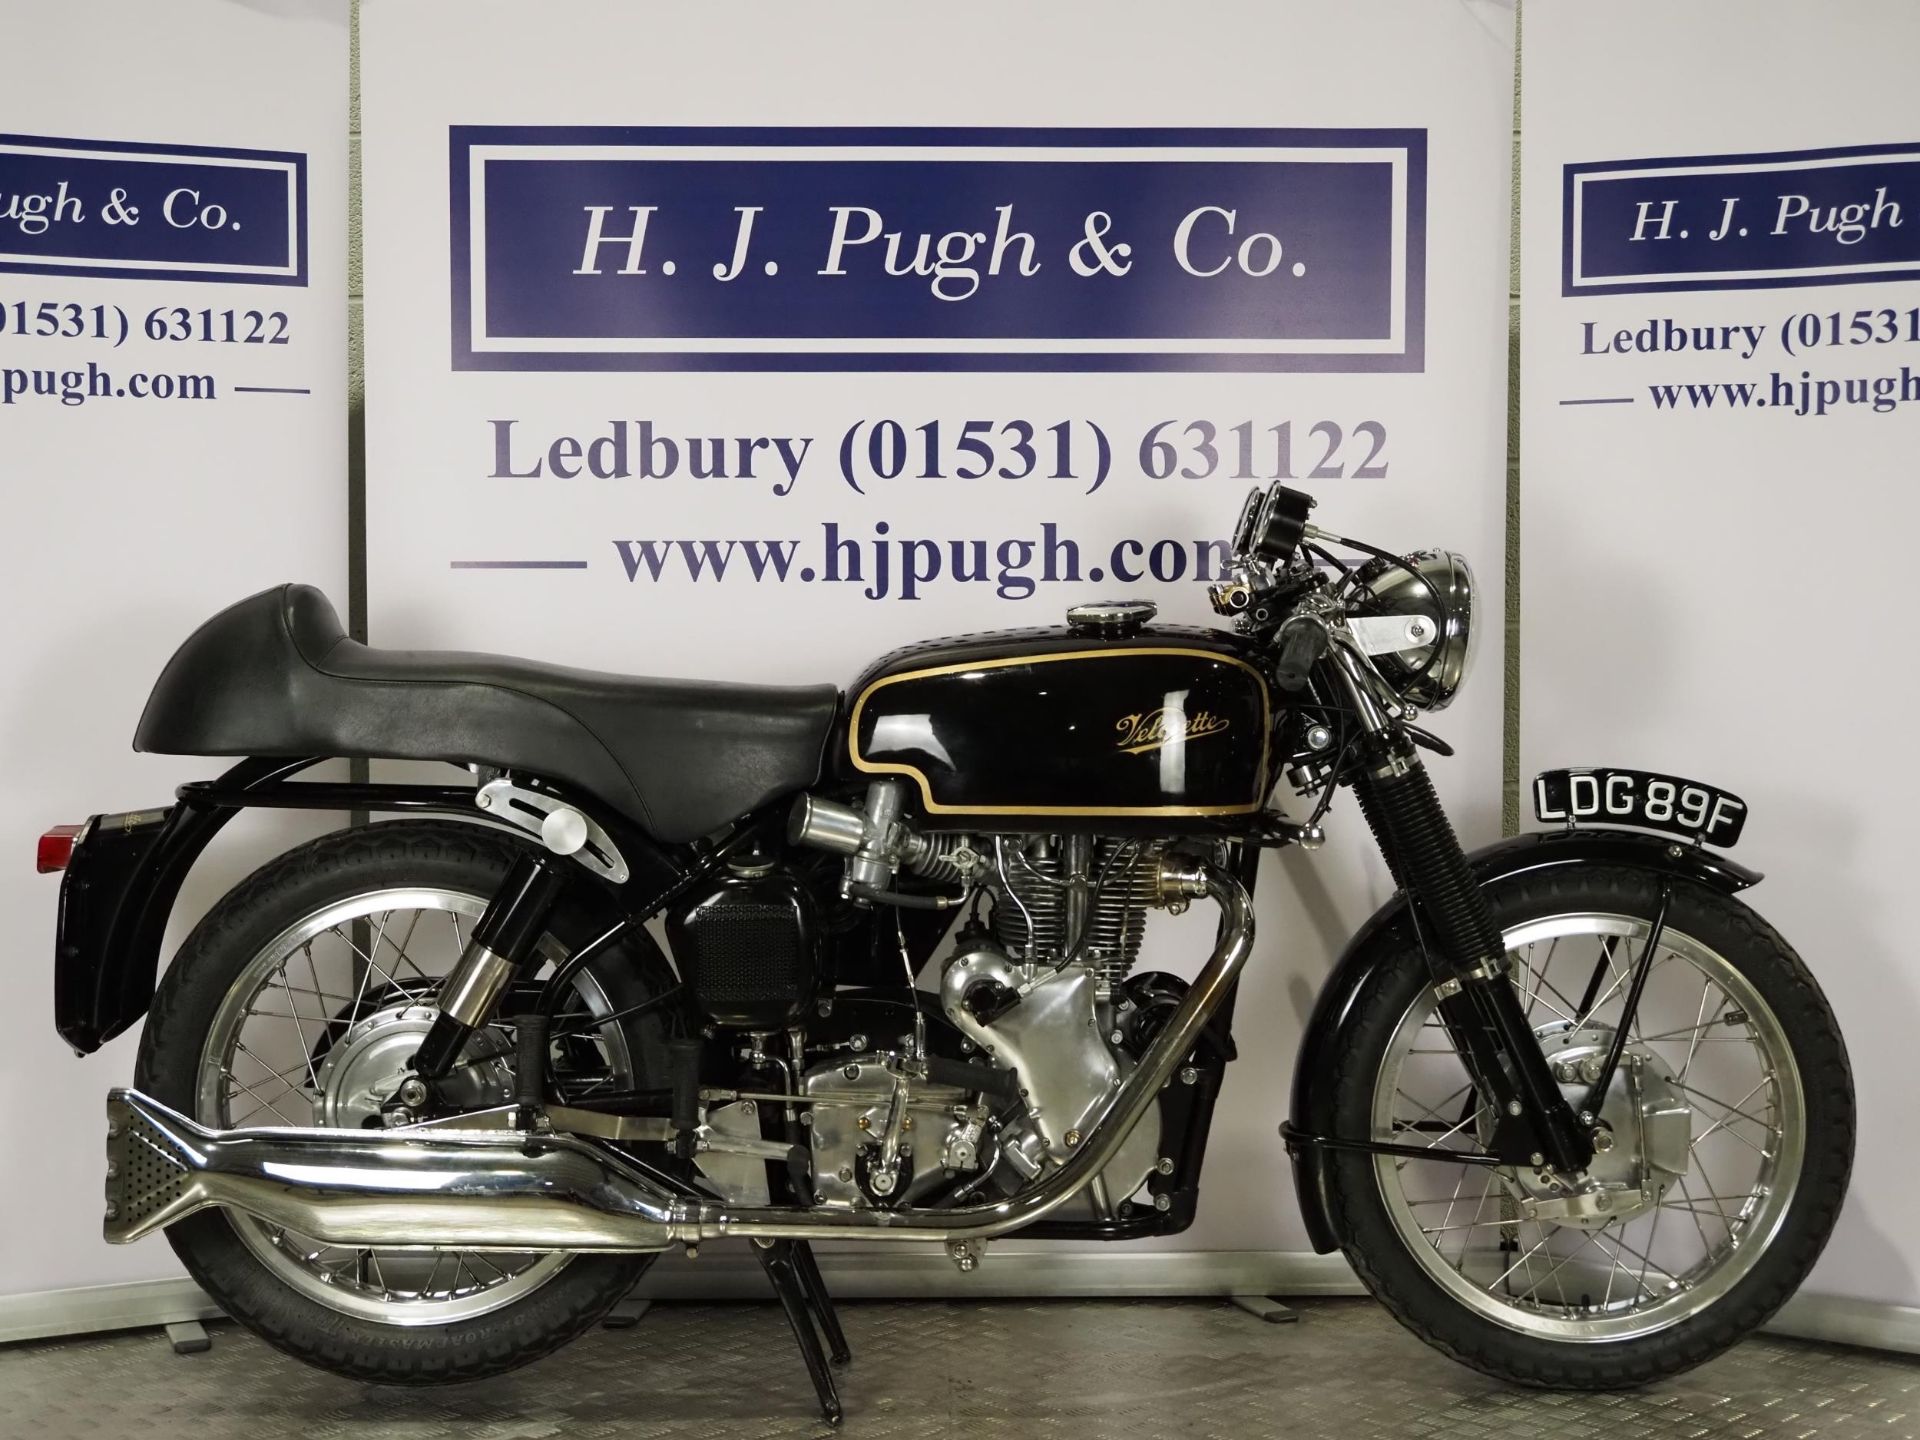 Velocette Thruxton motorcycle. 1967. 500cc. Frame No. RS/19436 Engine No. VMT/630 Runs and rides and